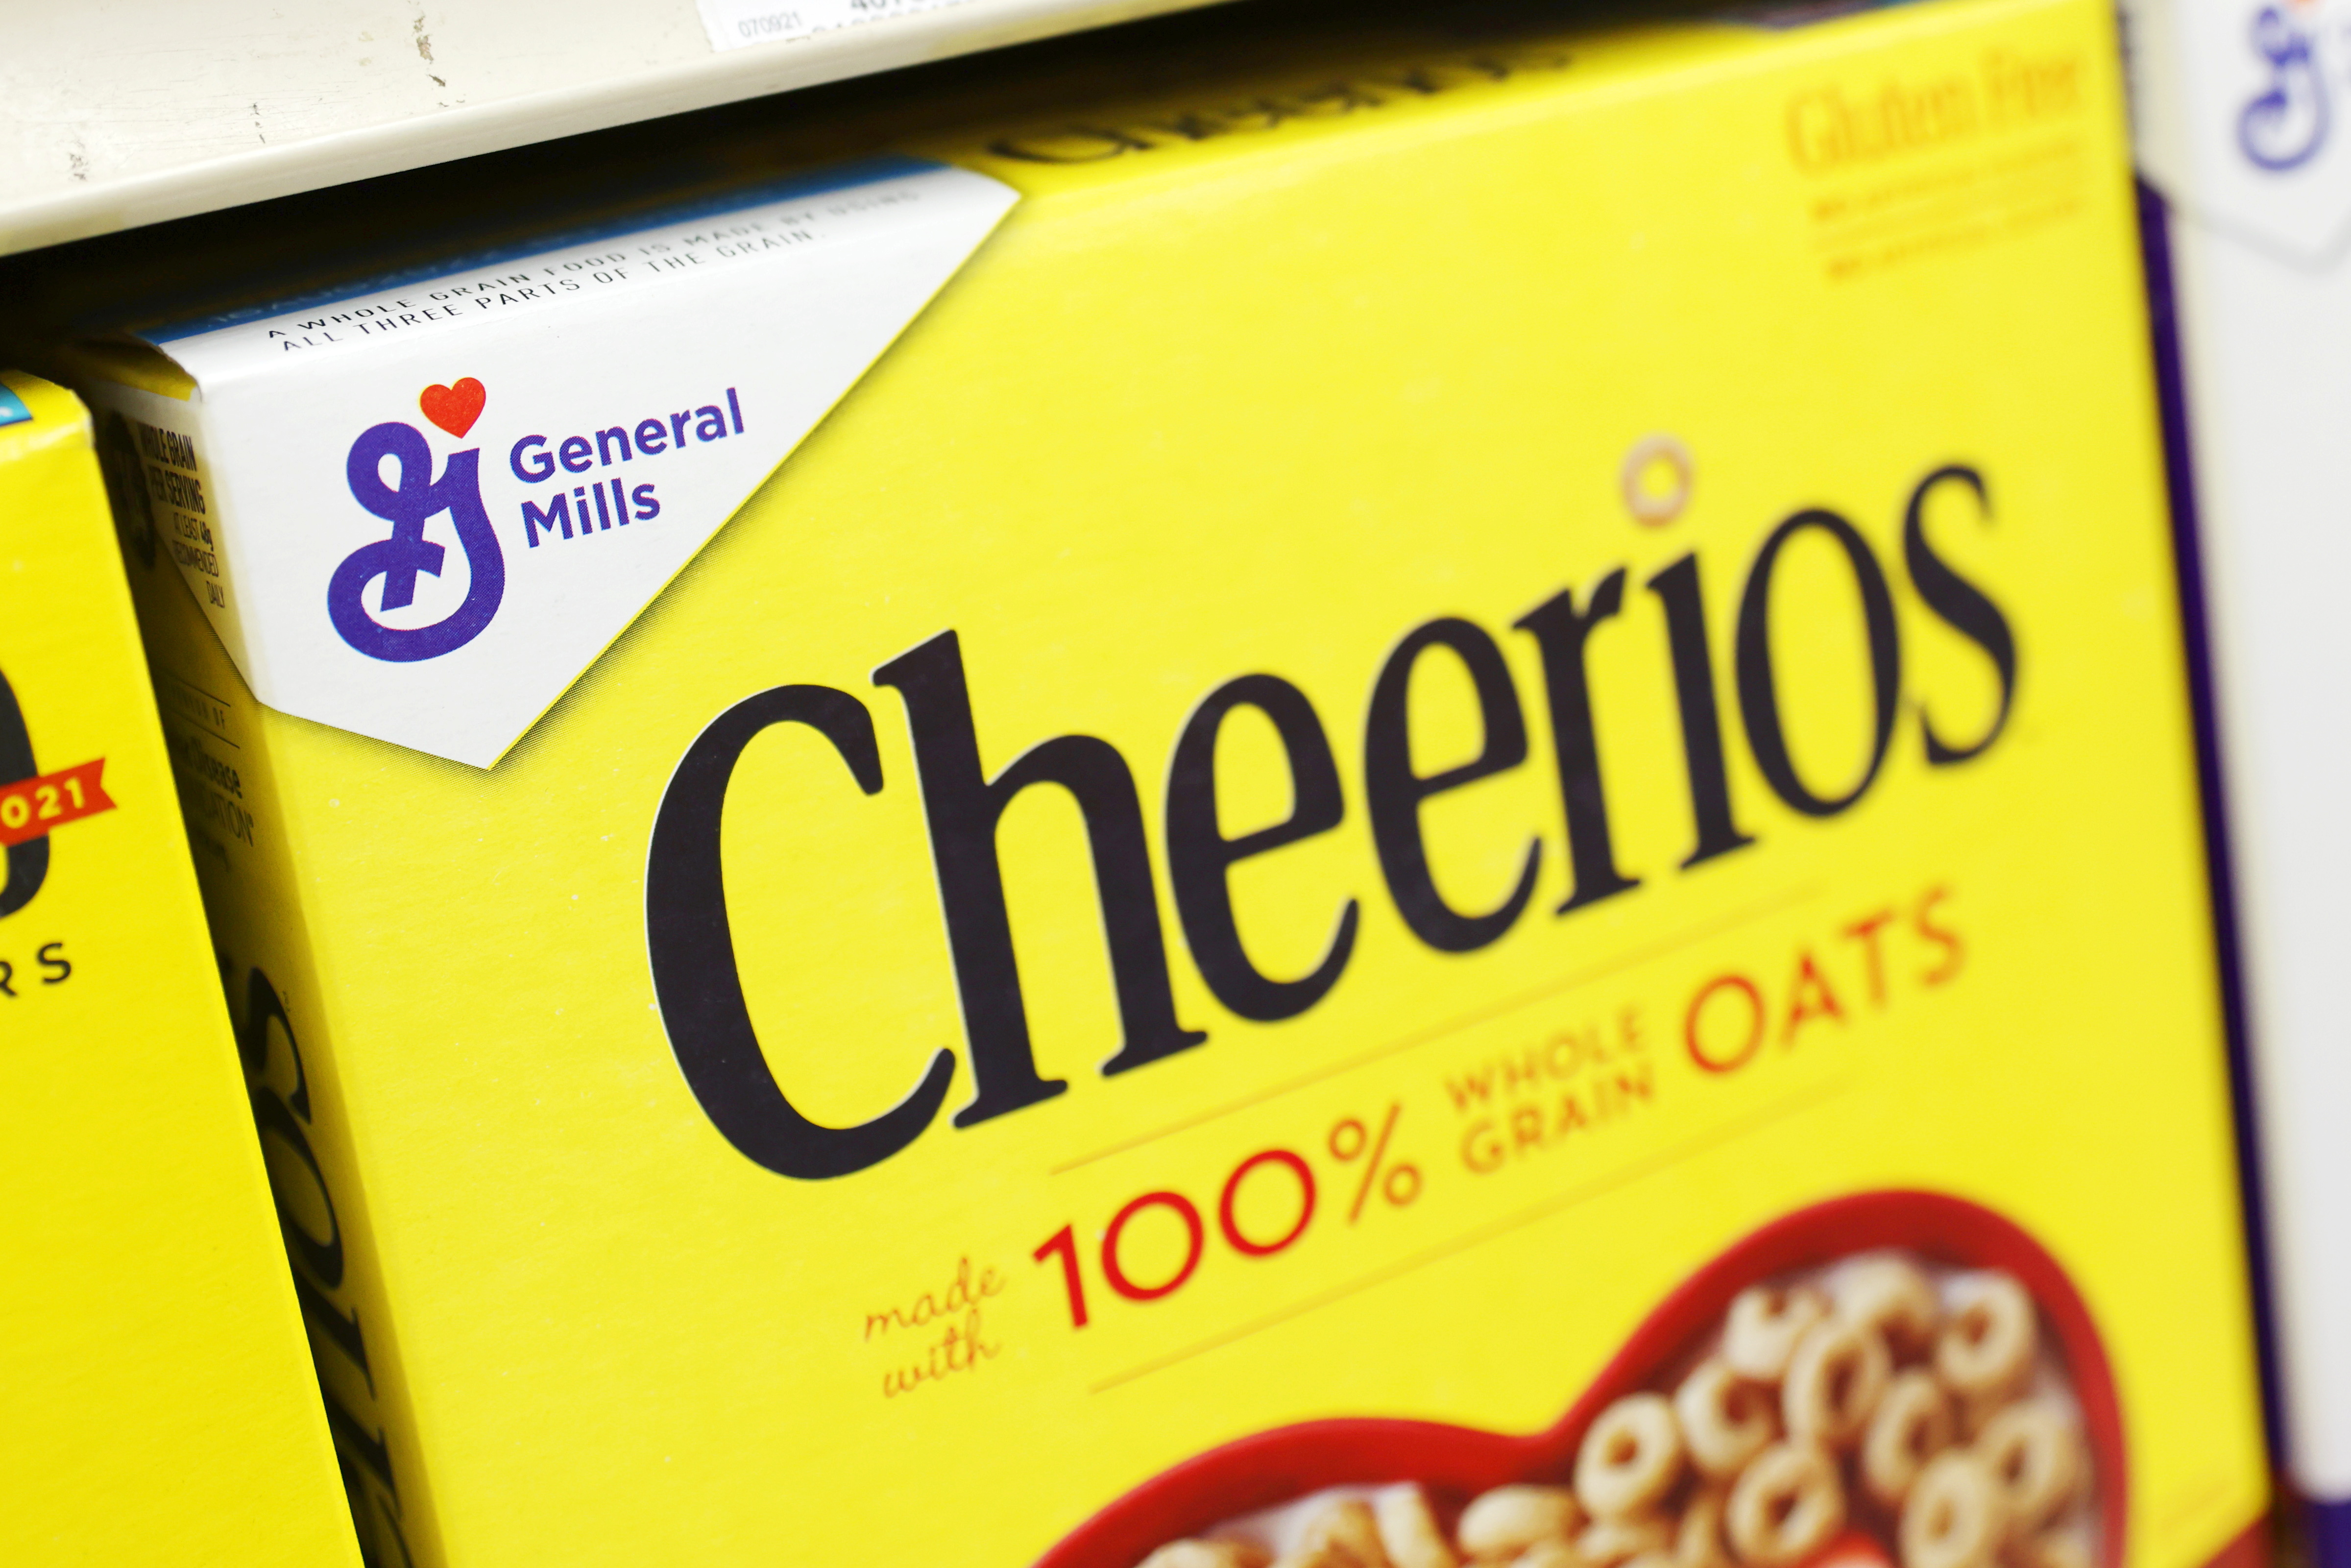 Cheerios, owned by General Mills, is seen in a store in Manhattan, New York